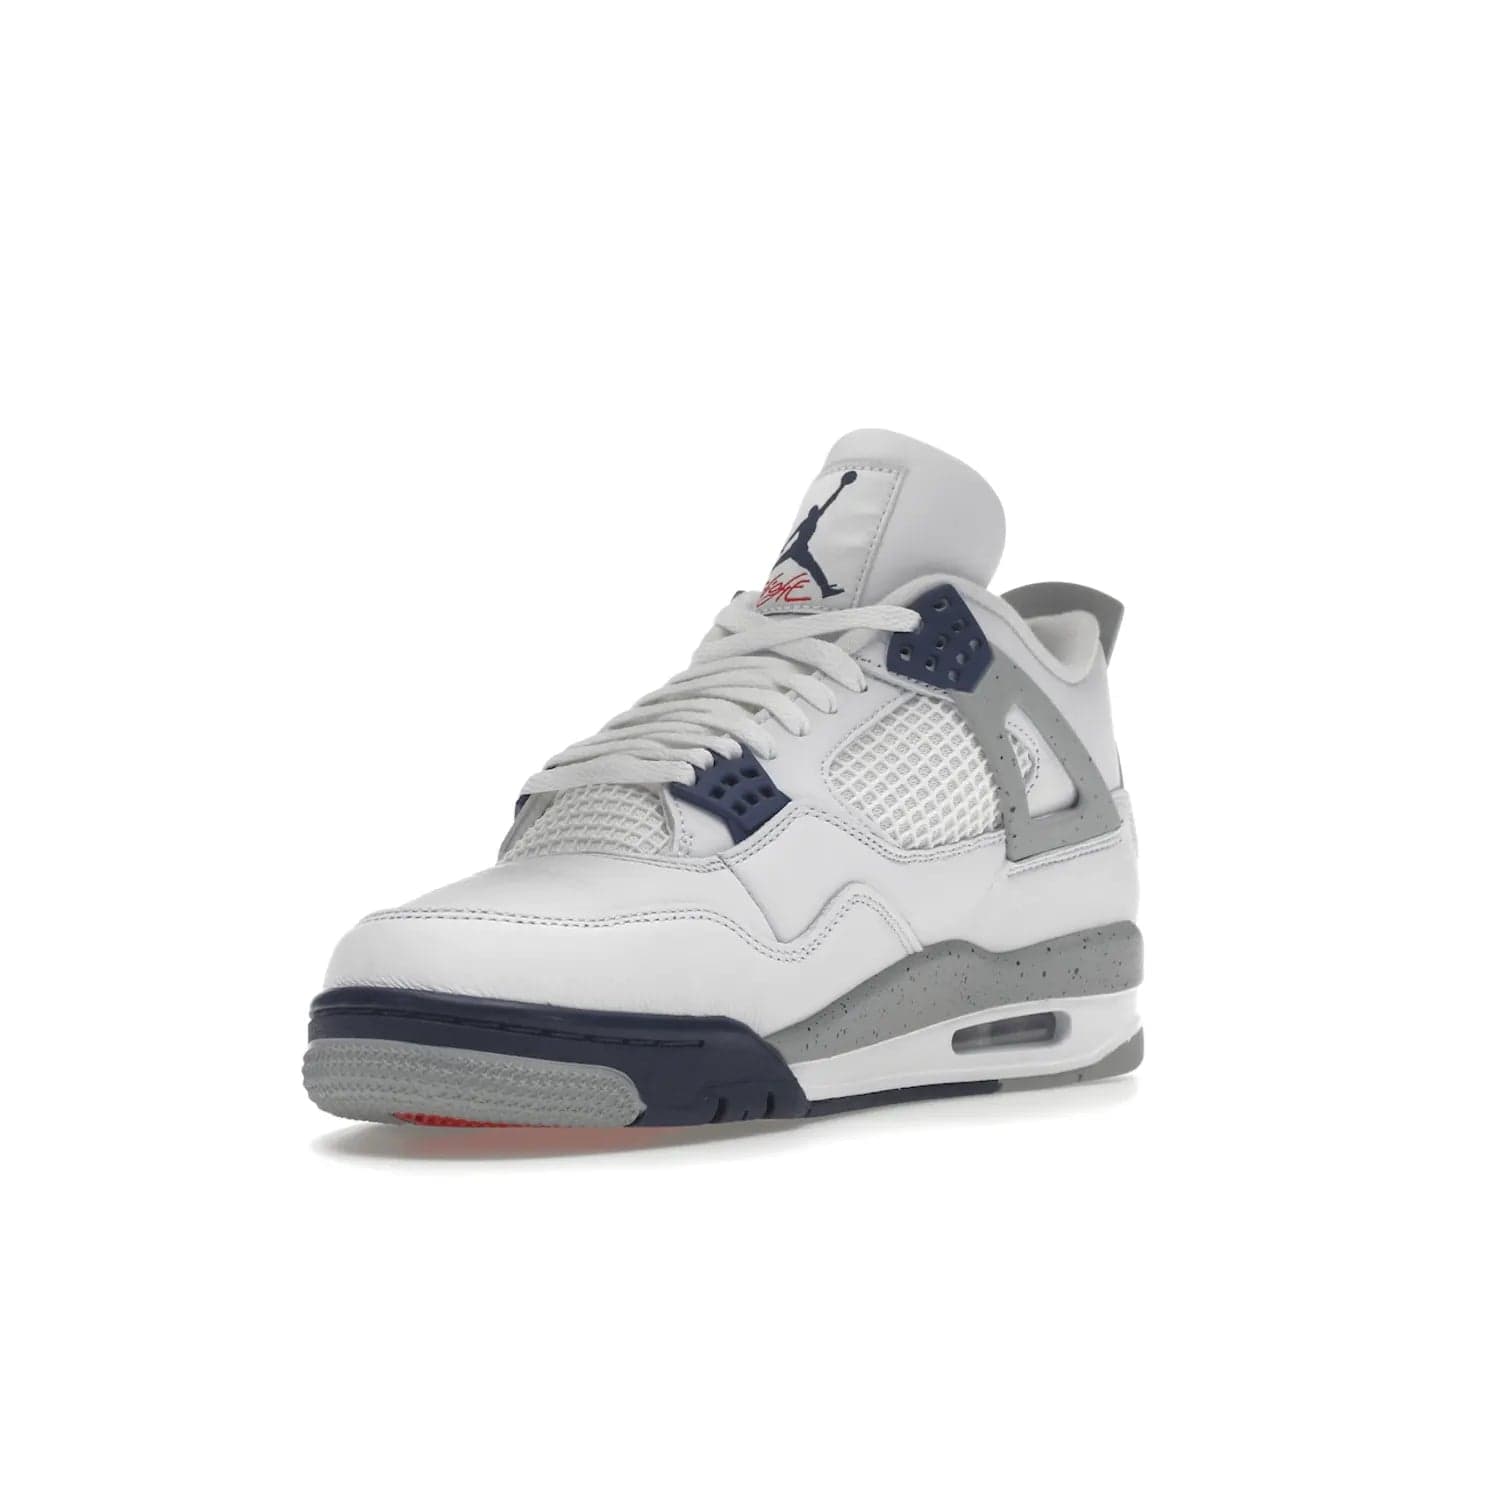 Jordan 4 Retro Midnight Navy - Image 14 - Only at www.BallersClubKickz.com - Shop the Air Jordan Retro 4 White Midnight Navy. Stand out with a classic white leather upper, black support wings, midnight navy eyelets, and Crimson Jumpman tongue tag. Unbeatable comfort with two-tone polyurethane midsole with encapsulated Air technology. Get yours before October 29th, 2022.